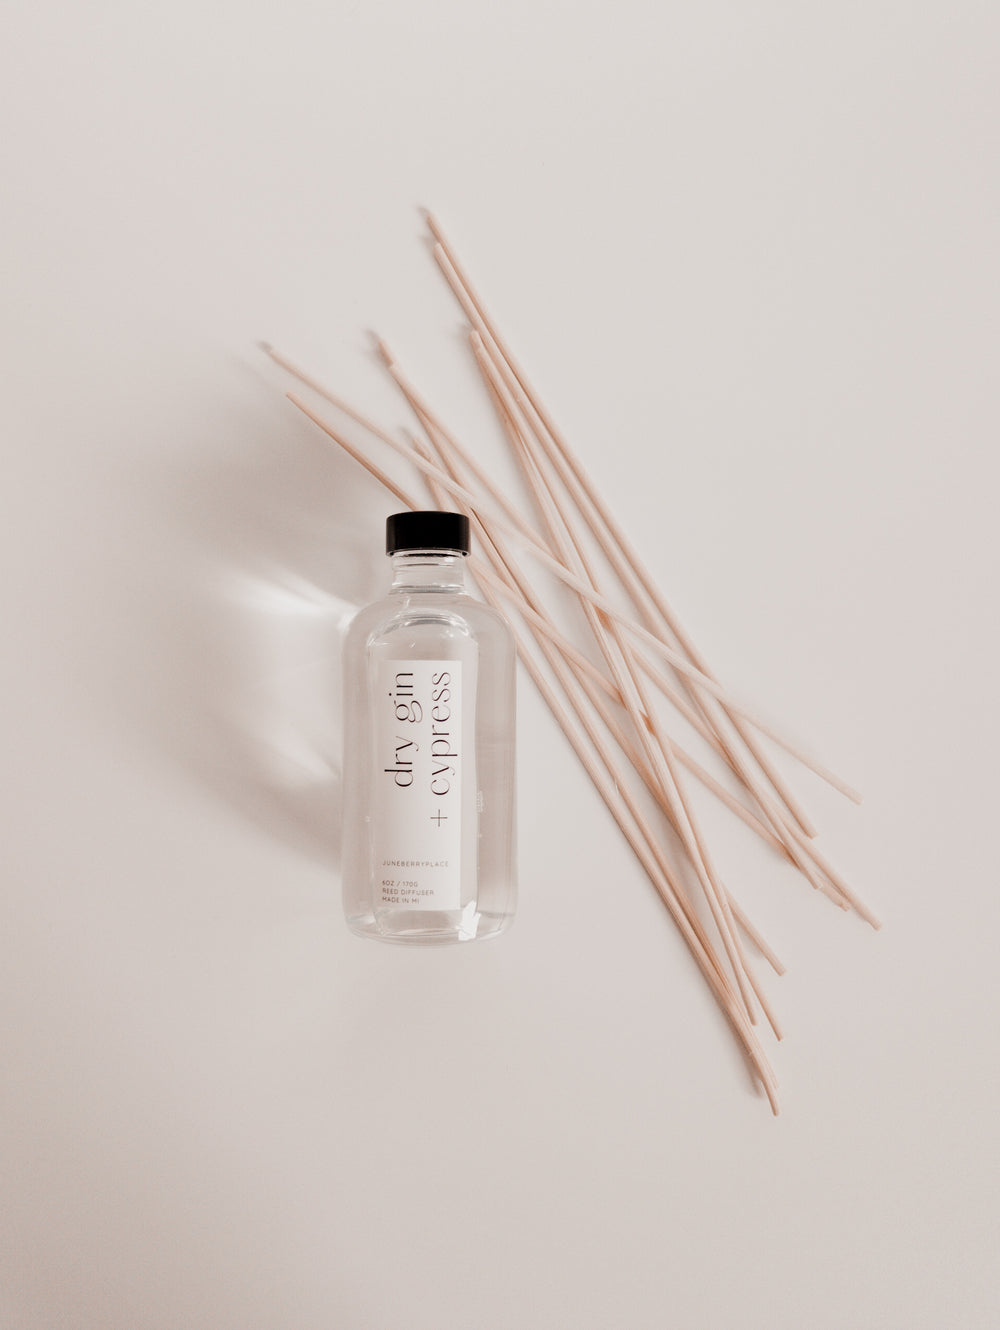 Dry Gin and Cypress Reed Diffuser with reeds in clear glass bottle with reeds by juneberryplace home fragrances